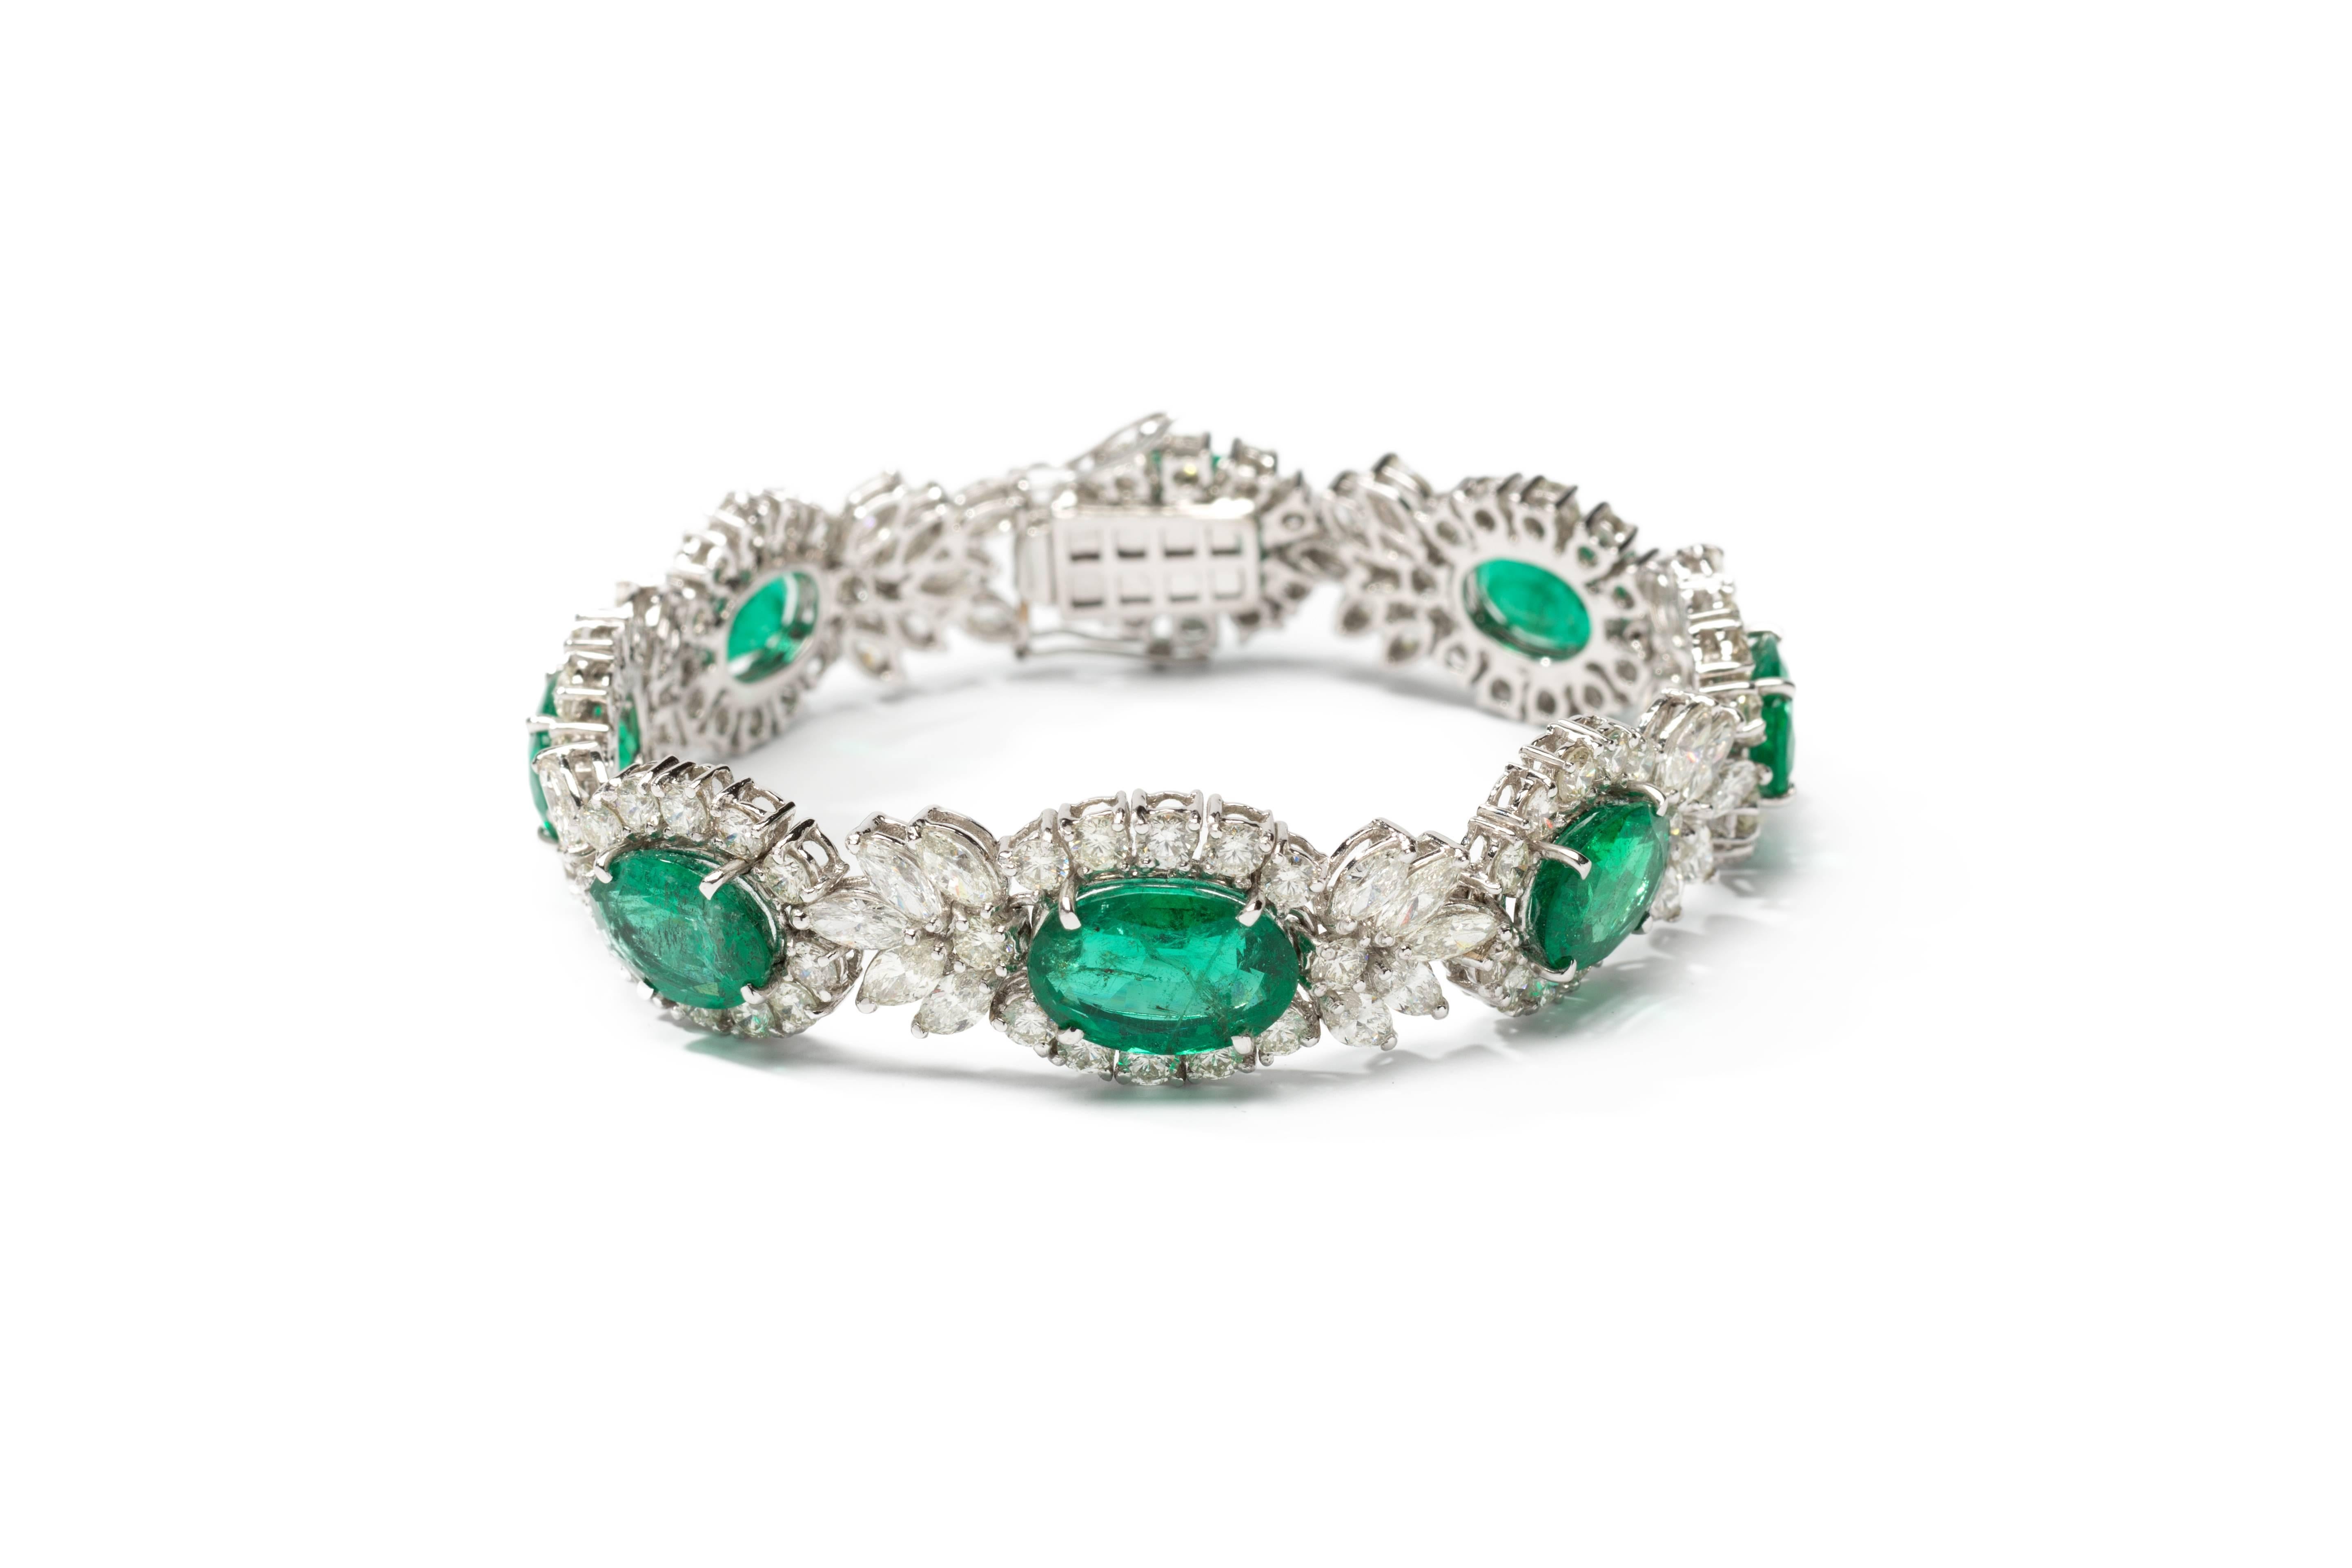 1950's-1960's. Set with 8 oval-shaped emeralds with a total of circa 21,88 carats, 131 diamonds in brillant-cut and navette-cut weighing circa 13,54 carats. Mounted in 18K white gold. Weight 34,2 g. 
Length: 7.28 in ( 18,5 cm ), Width: 0.59 in ( 1,5